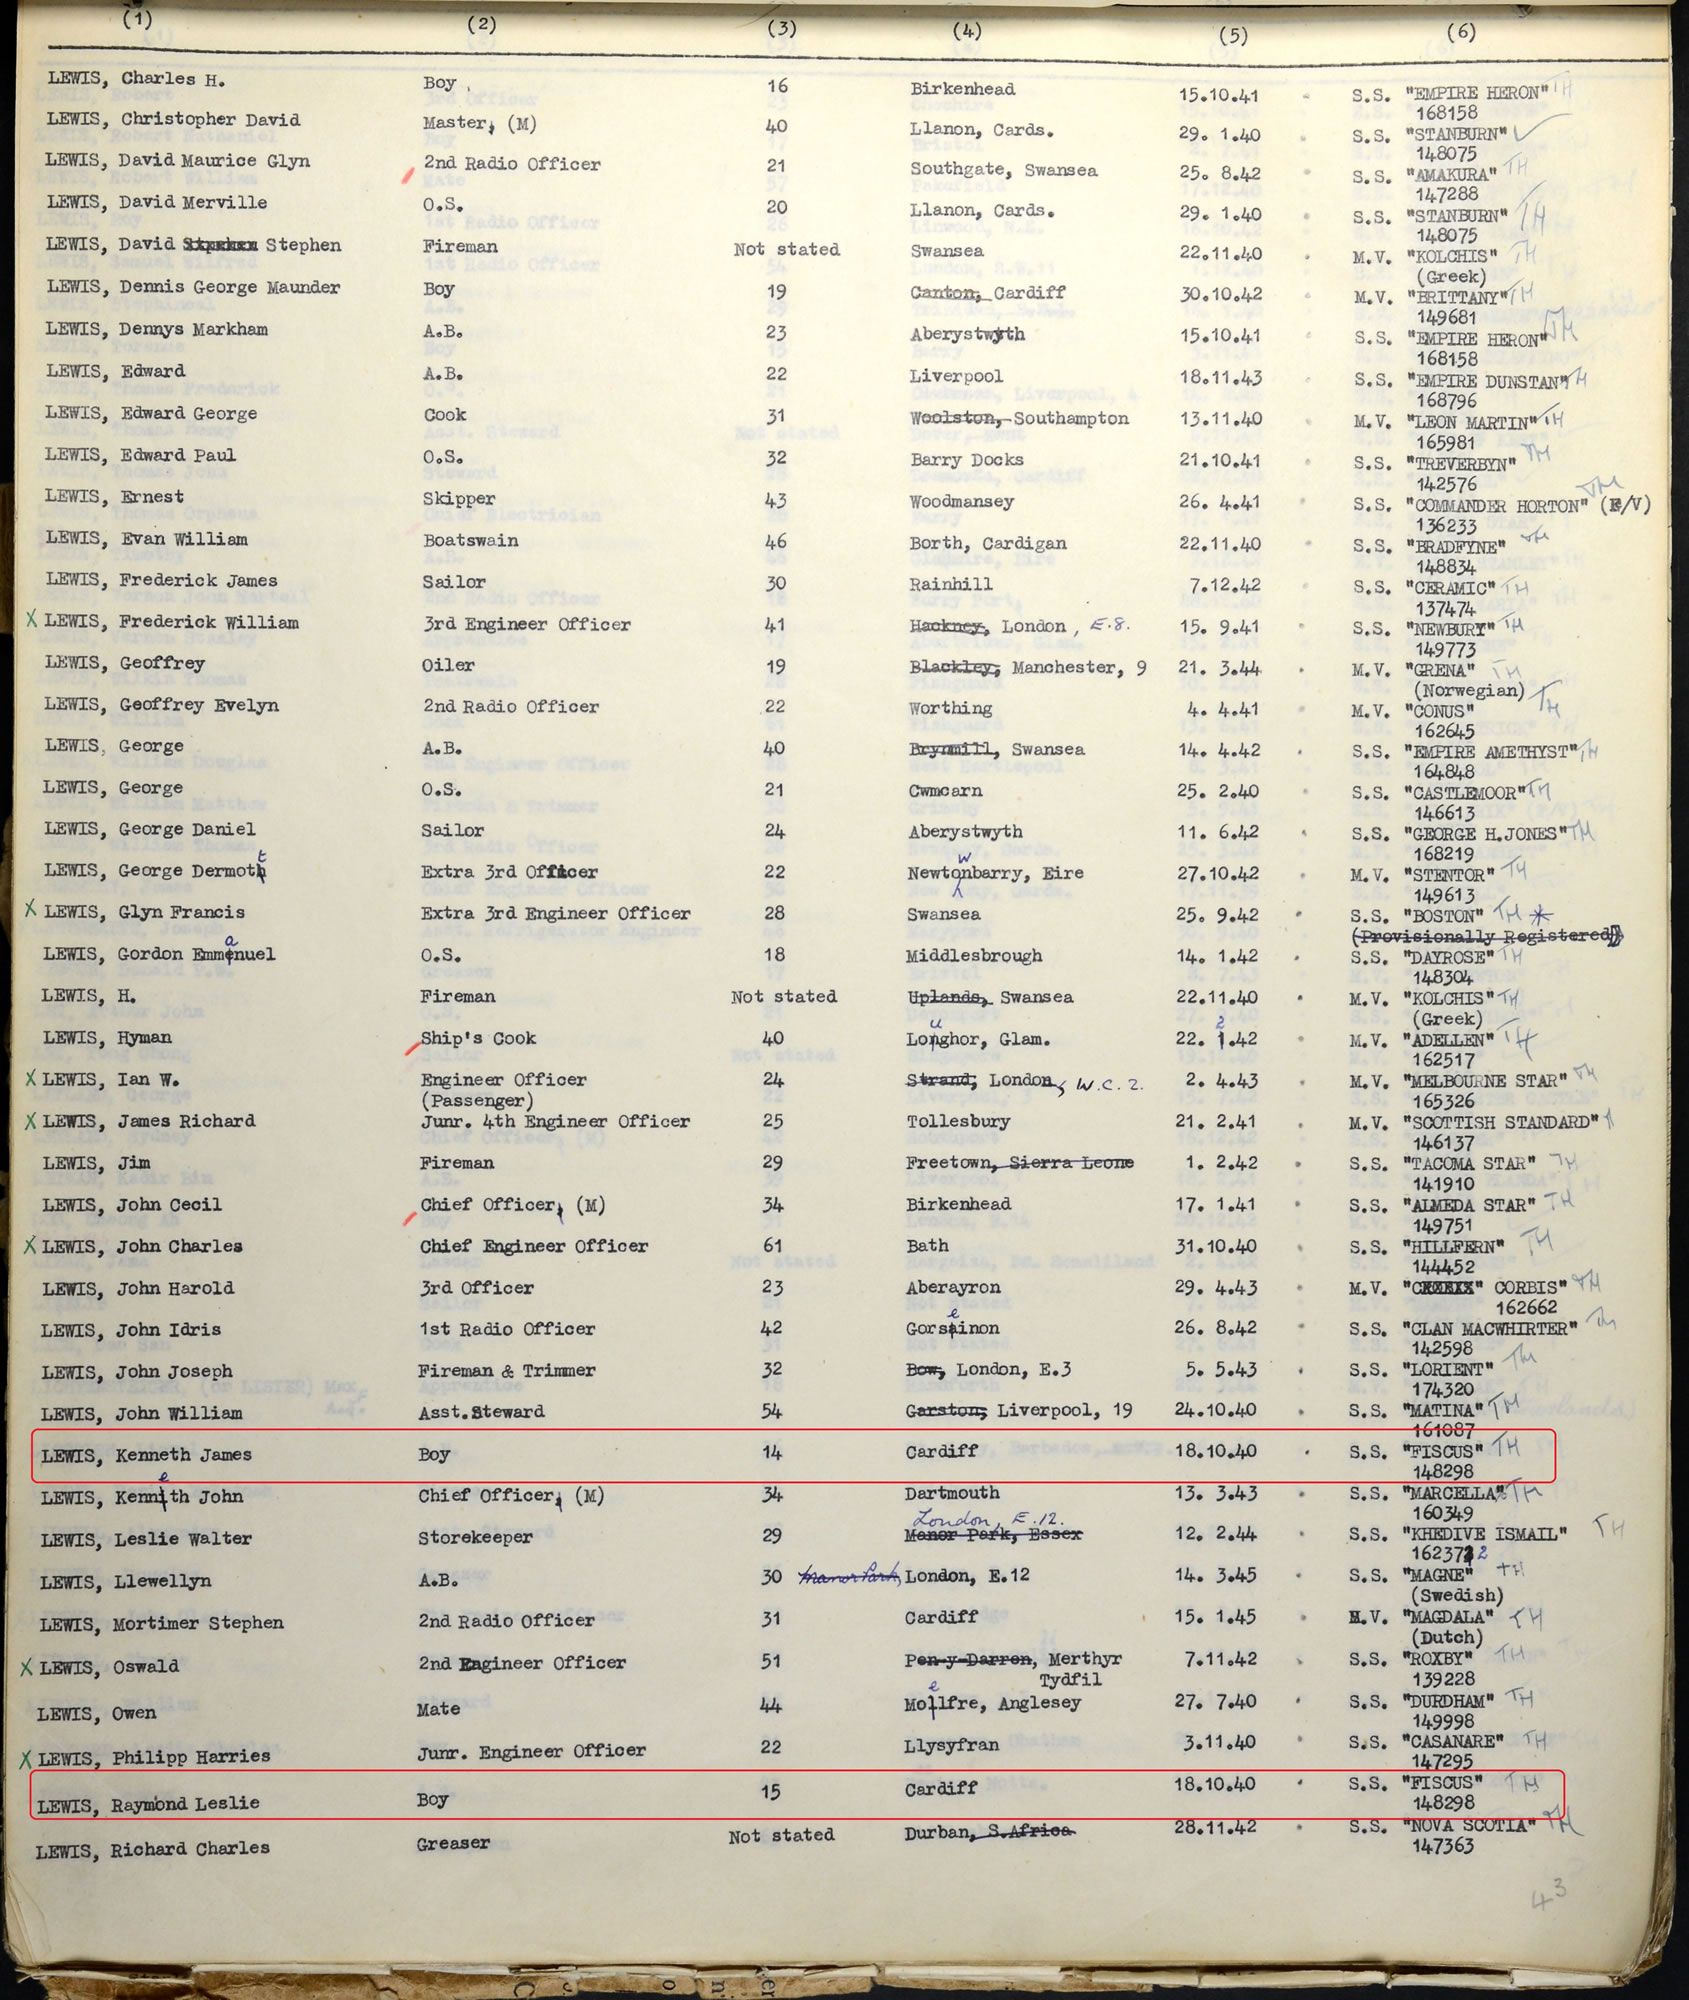 The 14 and 15 year old Lewis brothers in the BT 339 Rolls of Honour, killed together when SS Fiscus was sunk